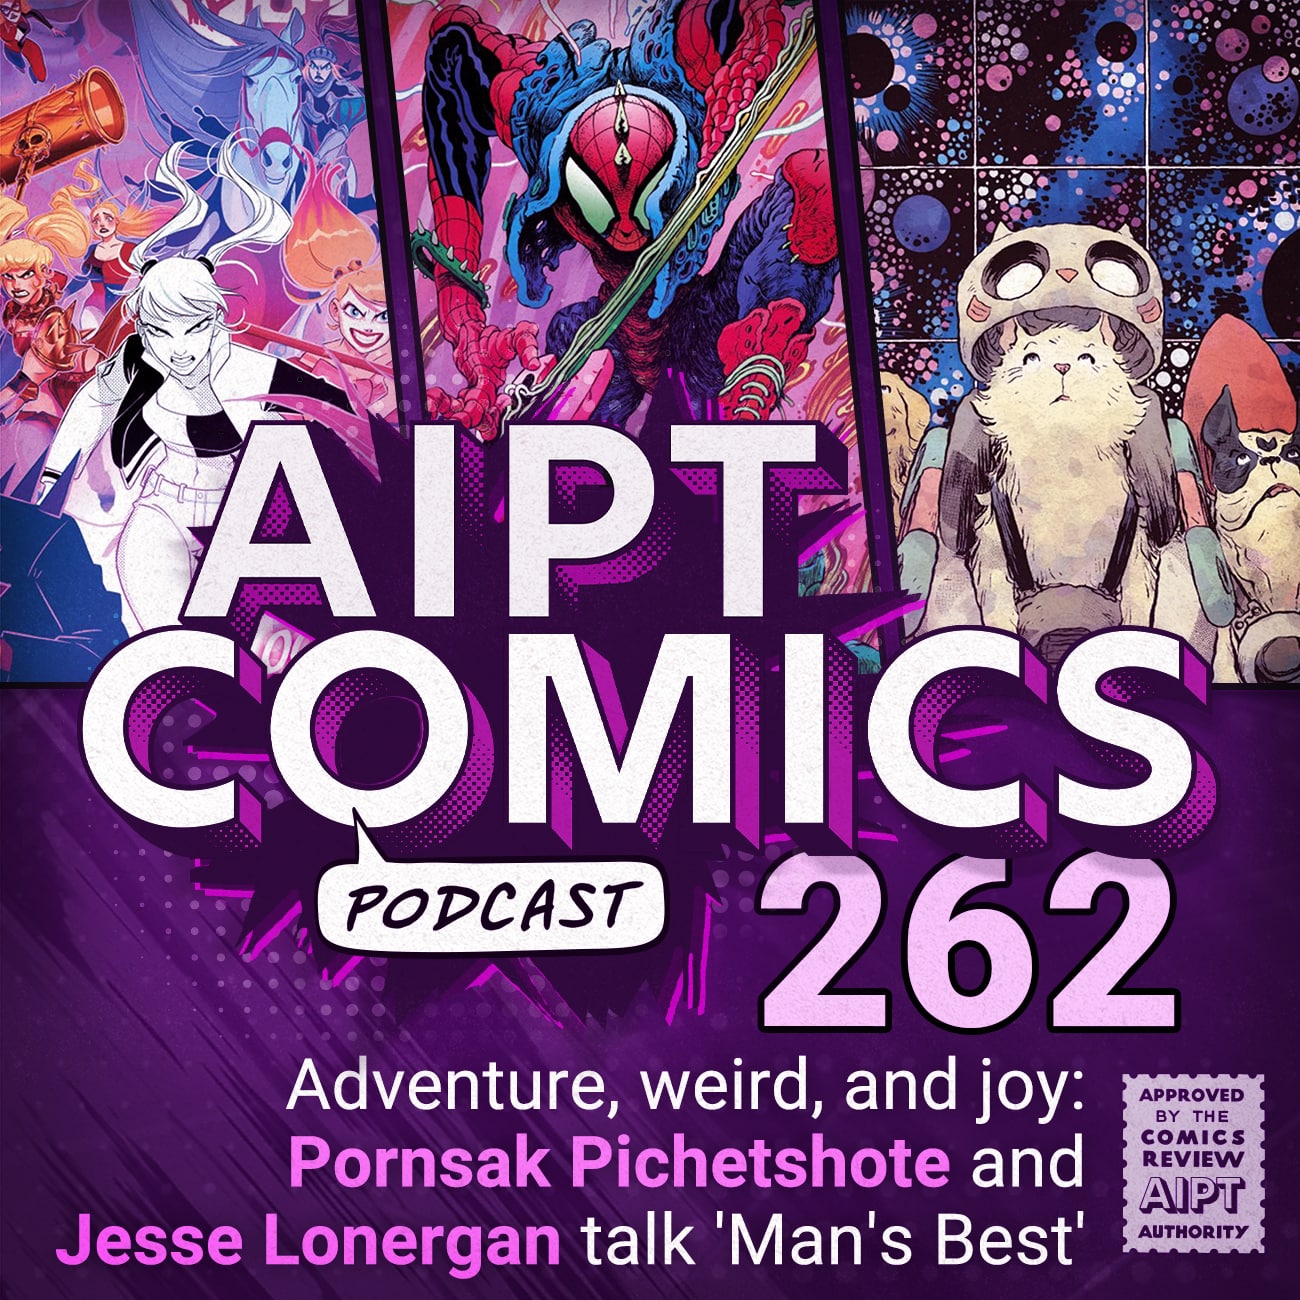 AIPT Comics Podcast Episode 262: Pornsak Pichetshote and Jesse Lonergan talk the adventure, the weird, and the joy in 'Man's Best'